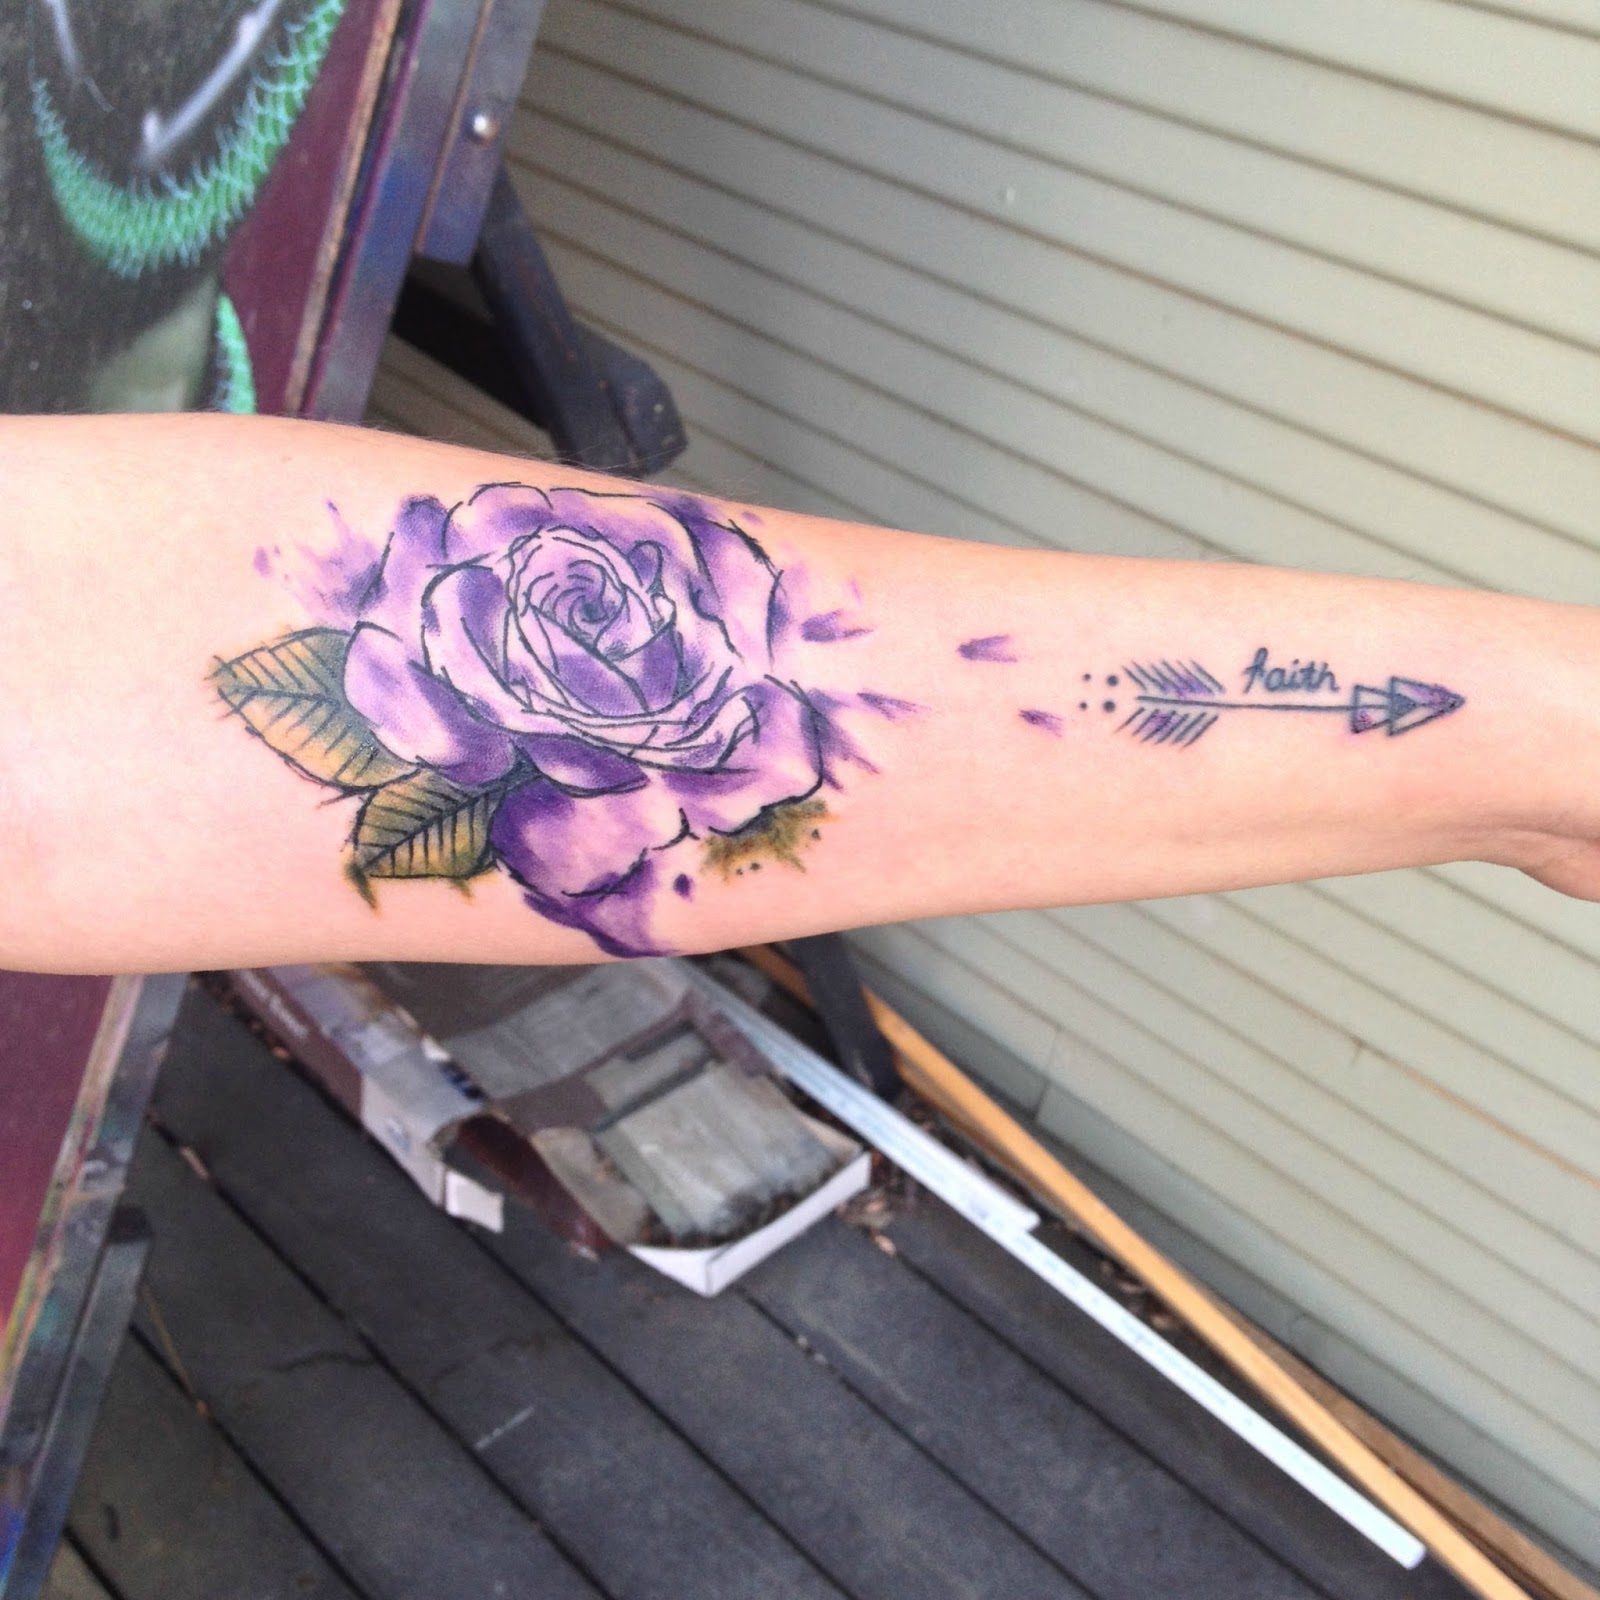 Awesome Inks: Tattoo Ideas, Inspiration, and Information: Rose Drawing